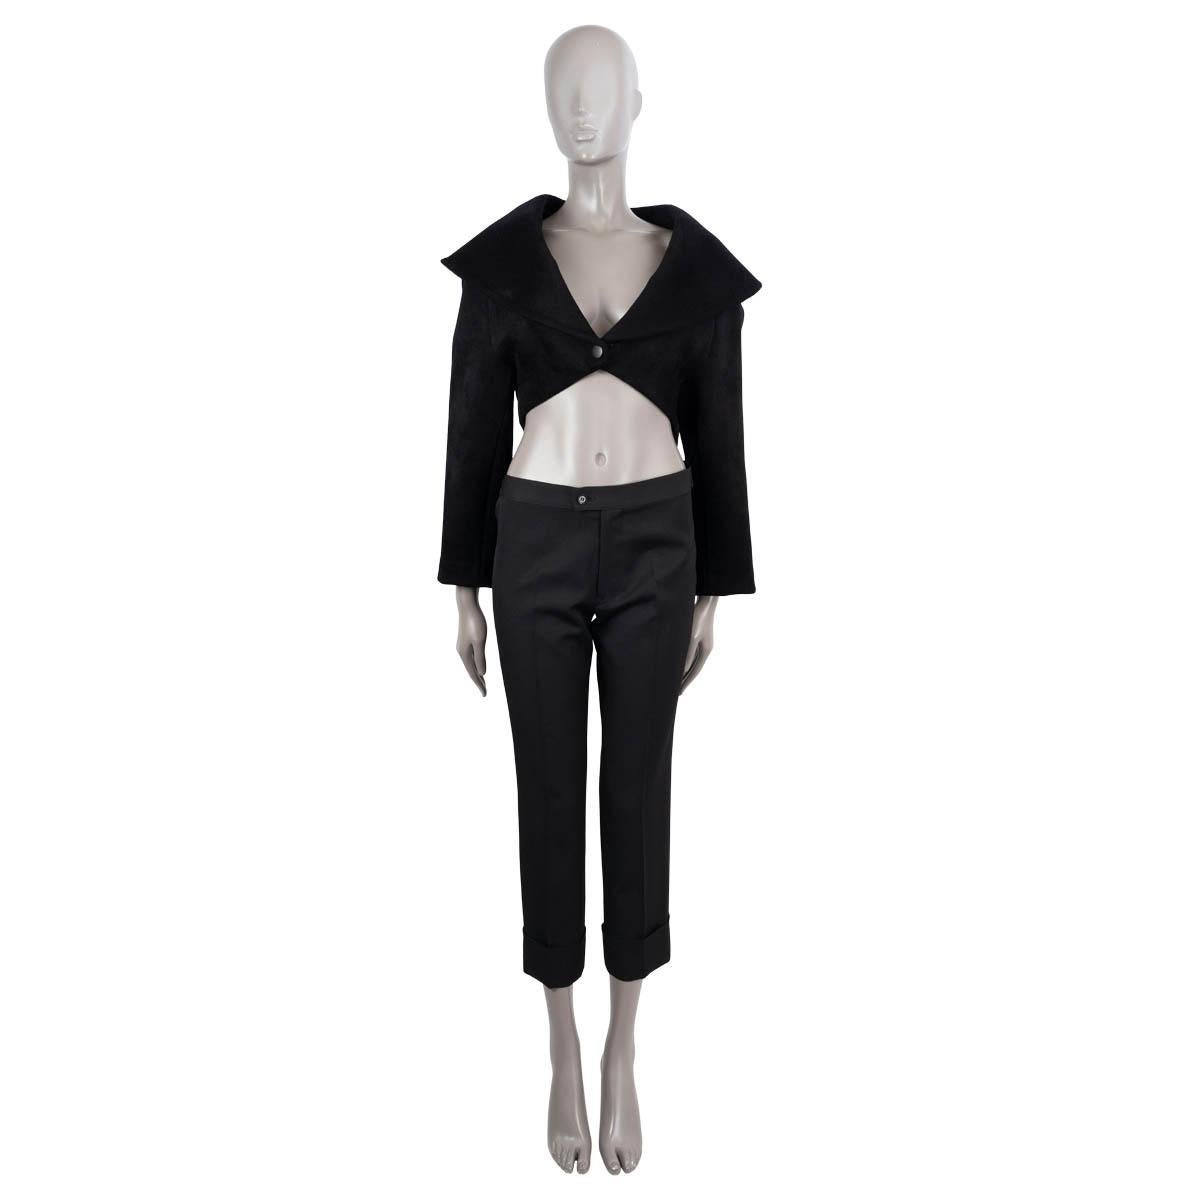 100% authentic Alaïa cropped jacket in black viscose (45%), nylon (29%), wool (22%), polyester (3%) and elastane (1%). Features an oversized shawl collar. Closes with a single button. Unlined. Has been worn and is in excellent condition. Comes with